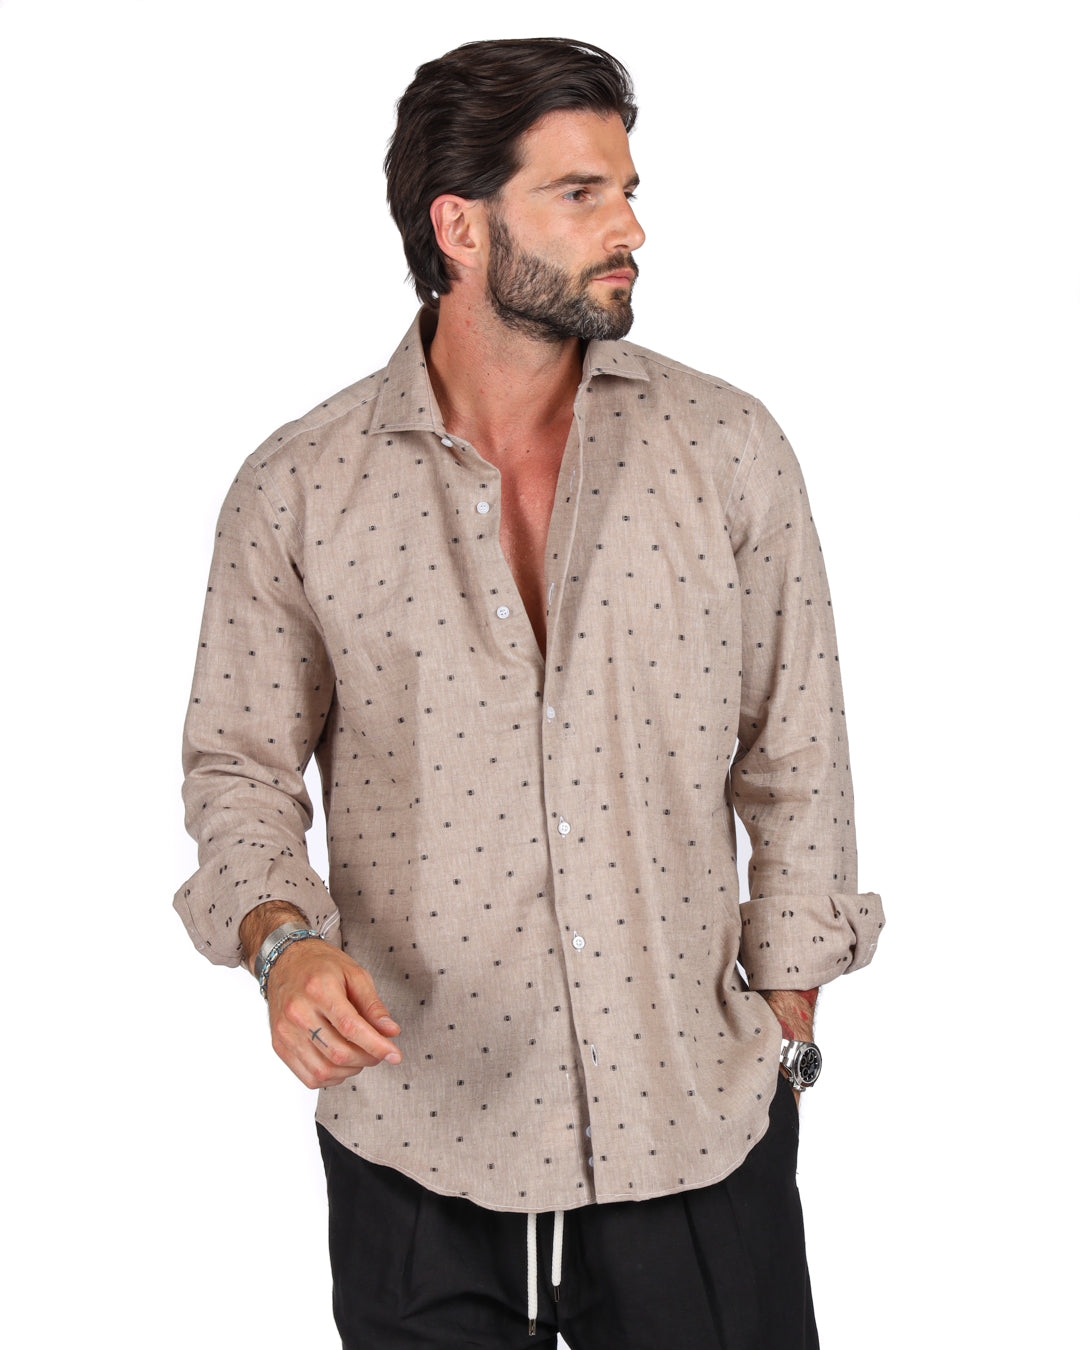 Salina - Classic mud shirt with brown linen embroidery